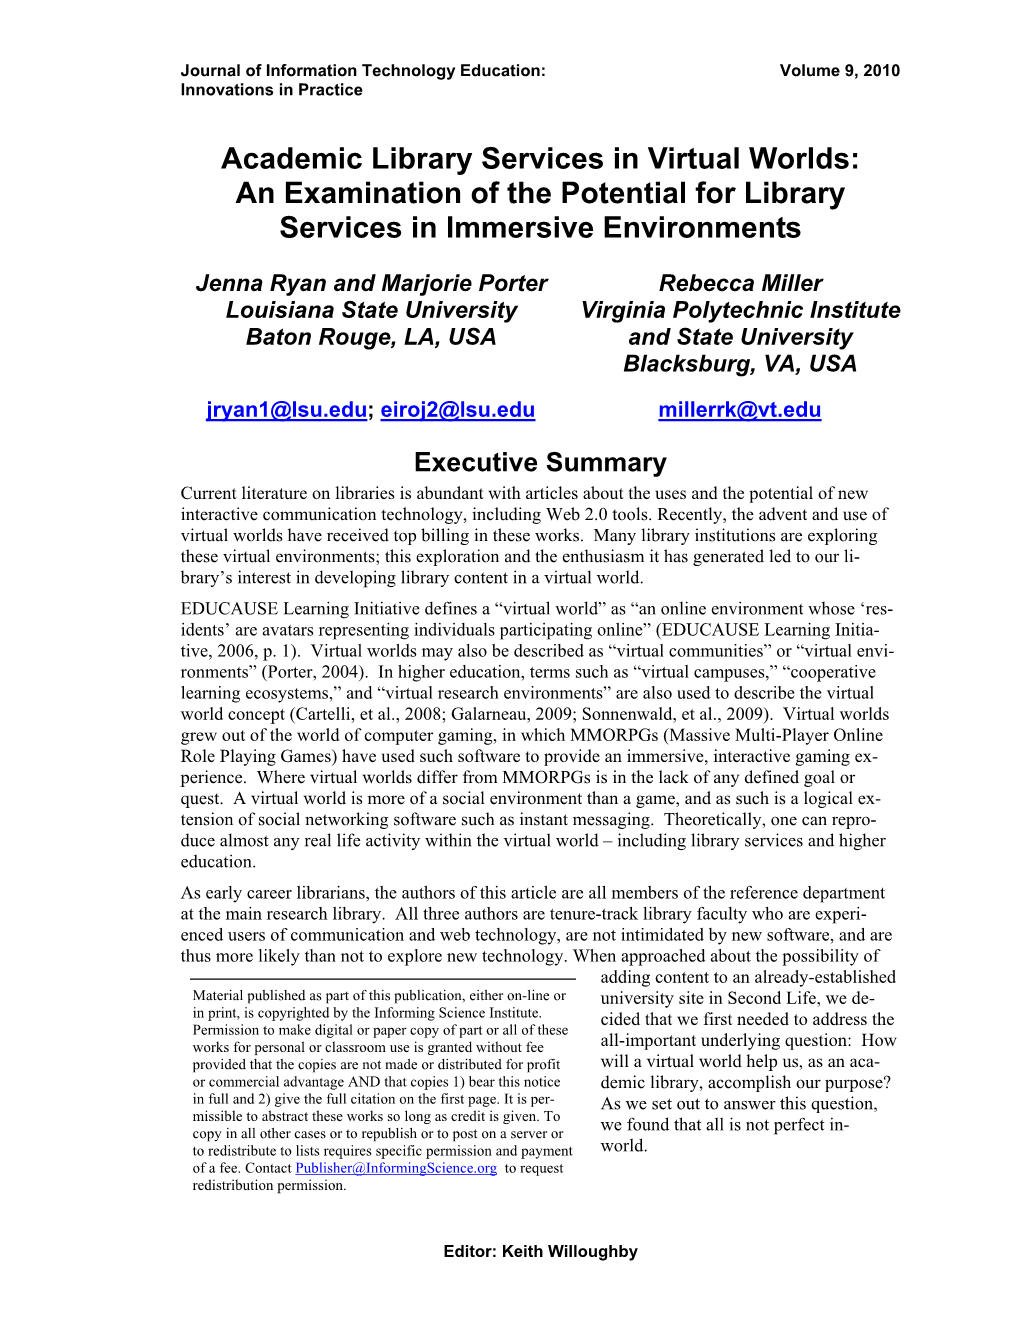 Academic Library Services in Virtual Worlds: an Examination of the Potential for Library Services in Immersive Environments